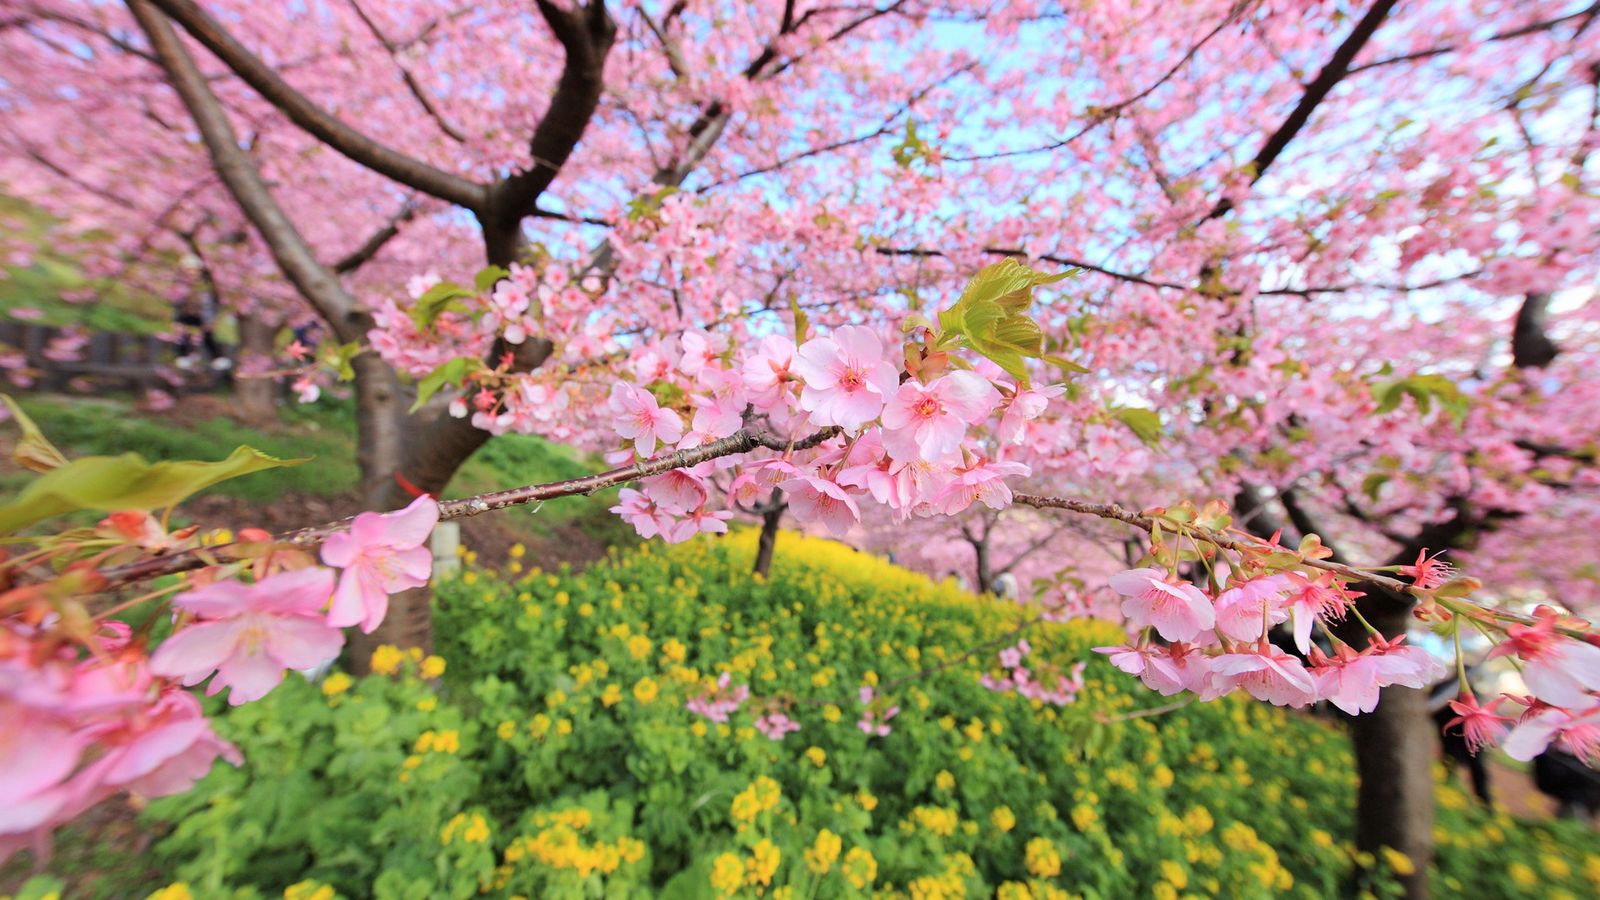 Download wallpaper 1600x900 spring, bloom, tree, flowers widescreen 16:9 HD background